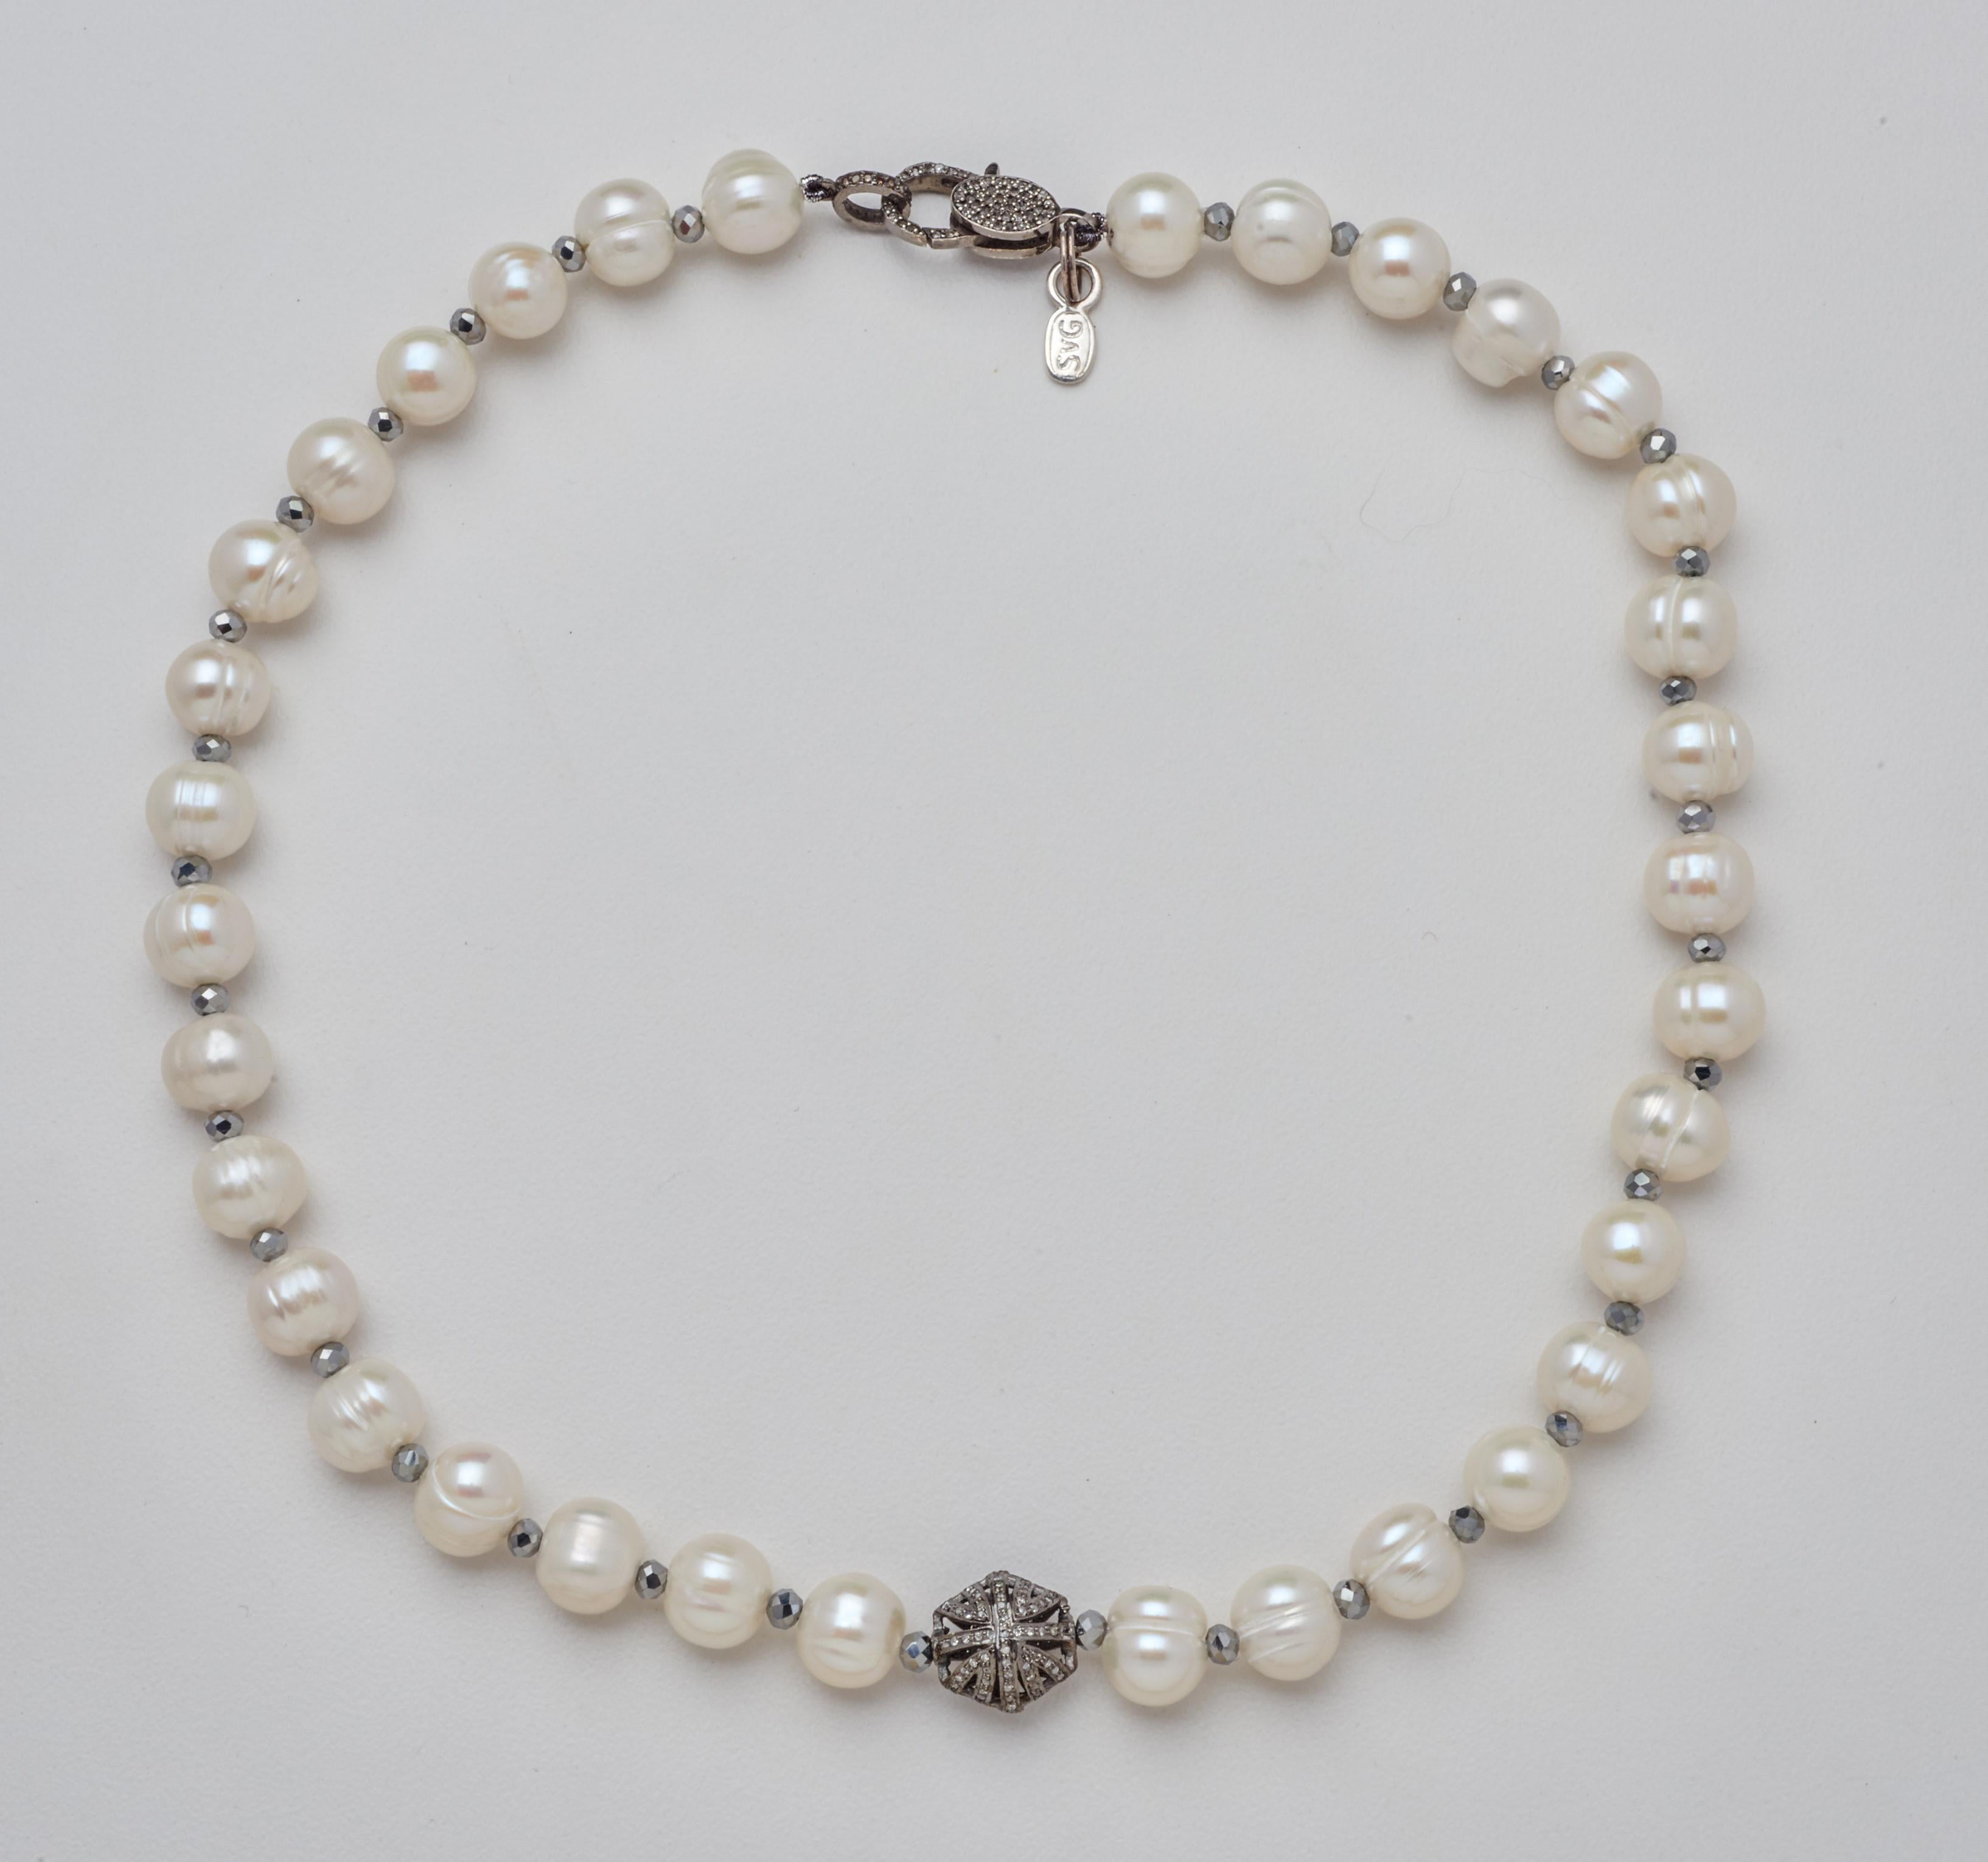 Thirty-four natural ringed White Akoya Pearls hand-strung with diamond-cut Hematite Beads lead to a stunning Diamond & Oxidized Sterling Silver Puff Bead Charm feature. This sixteen inch Necklace is finished with a Diamond and Sterling Silver Clasp.